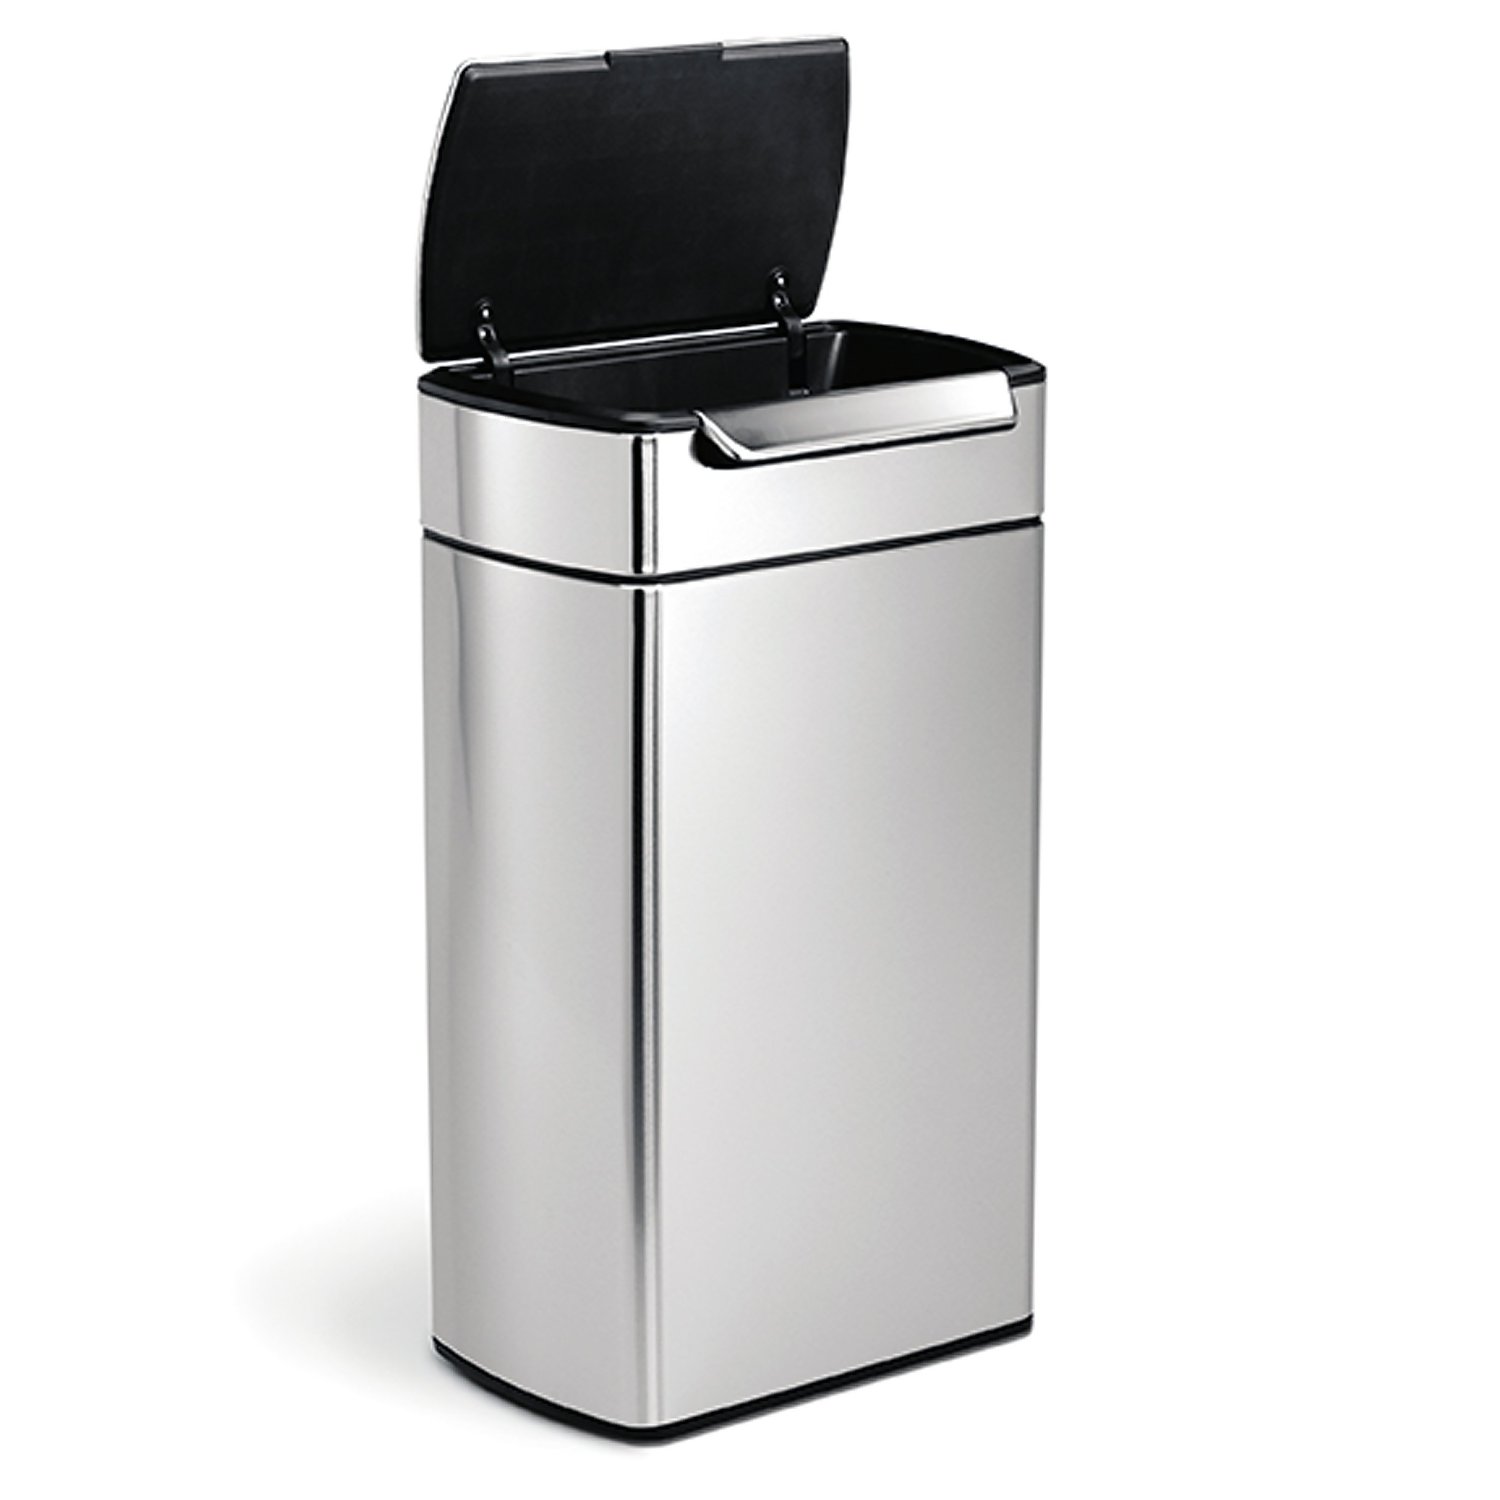 Stainless steel trash can ,Rectangular Touch-Bar Trash Can,hot sale trash can EB-P0068